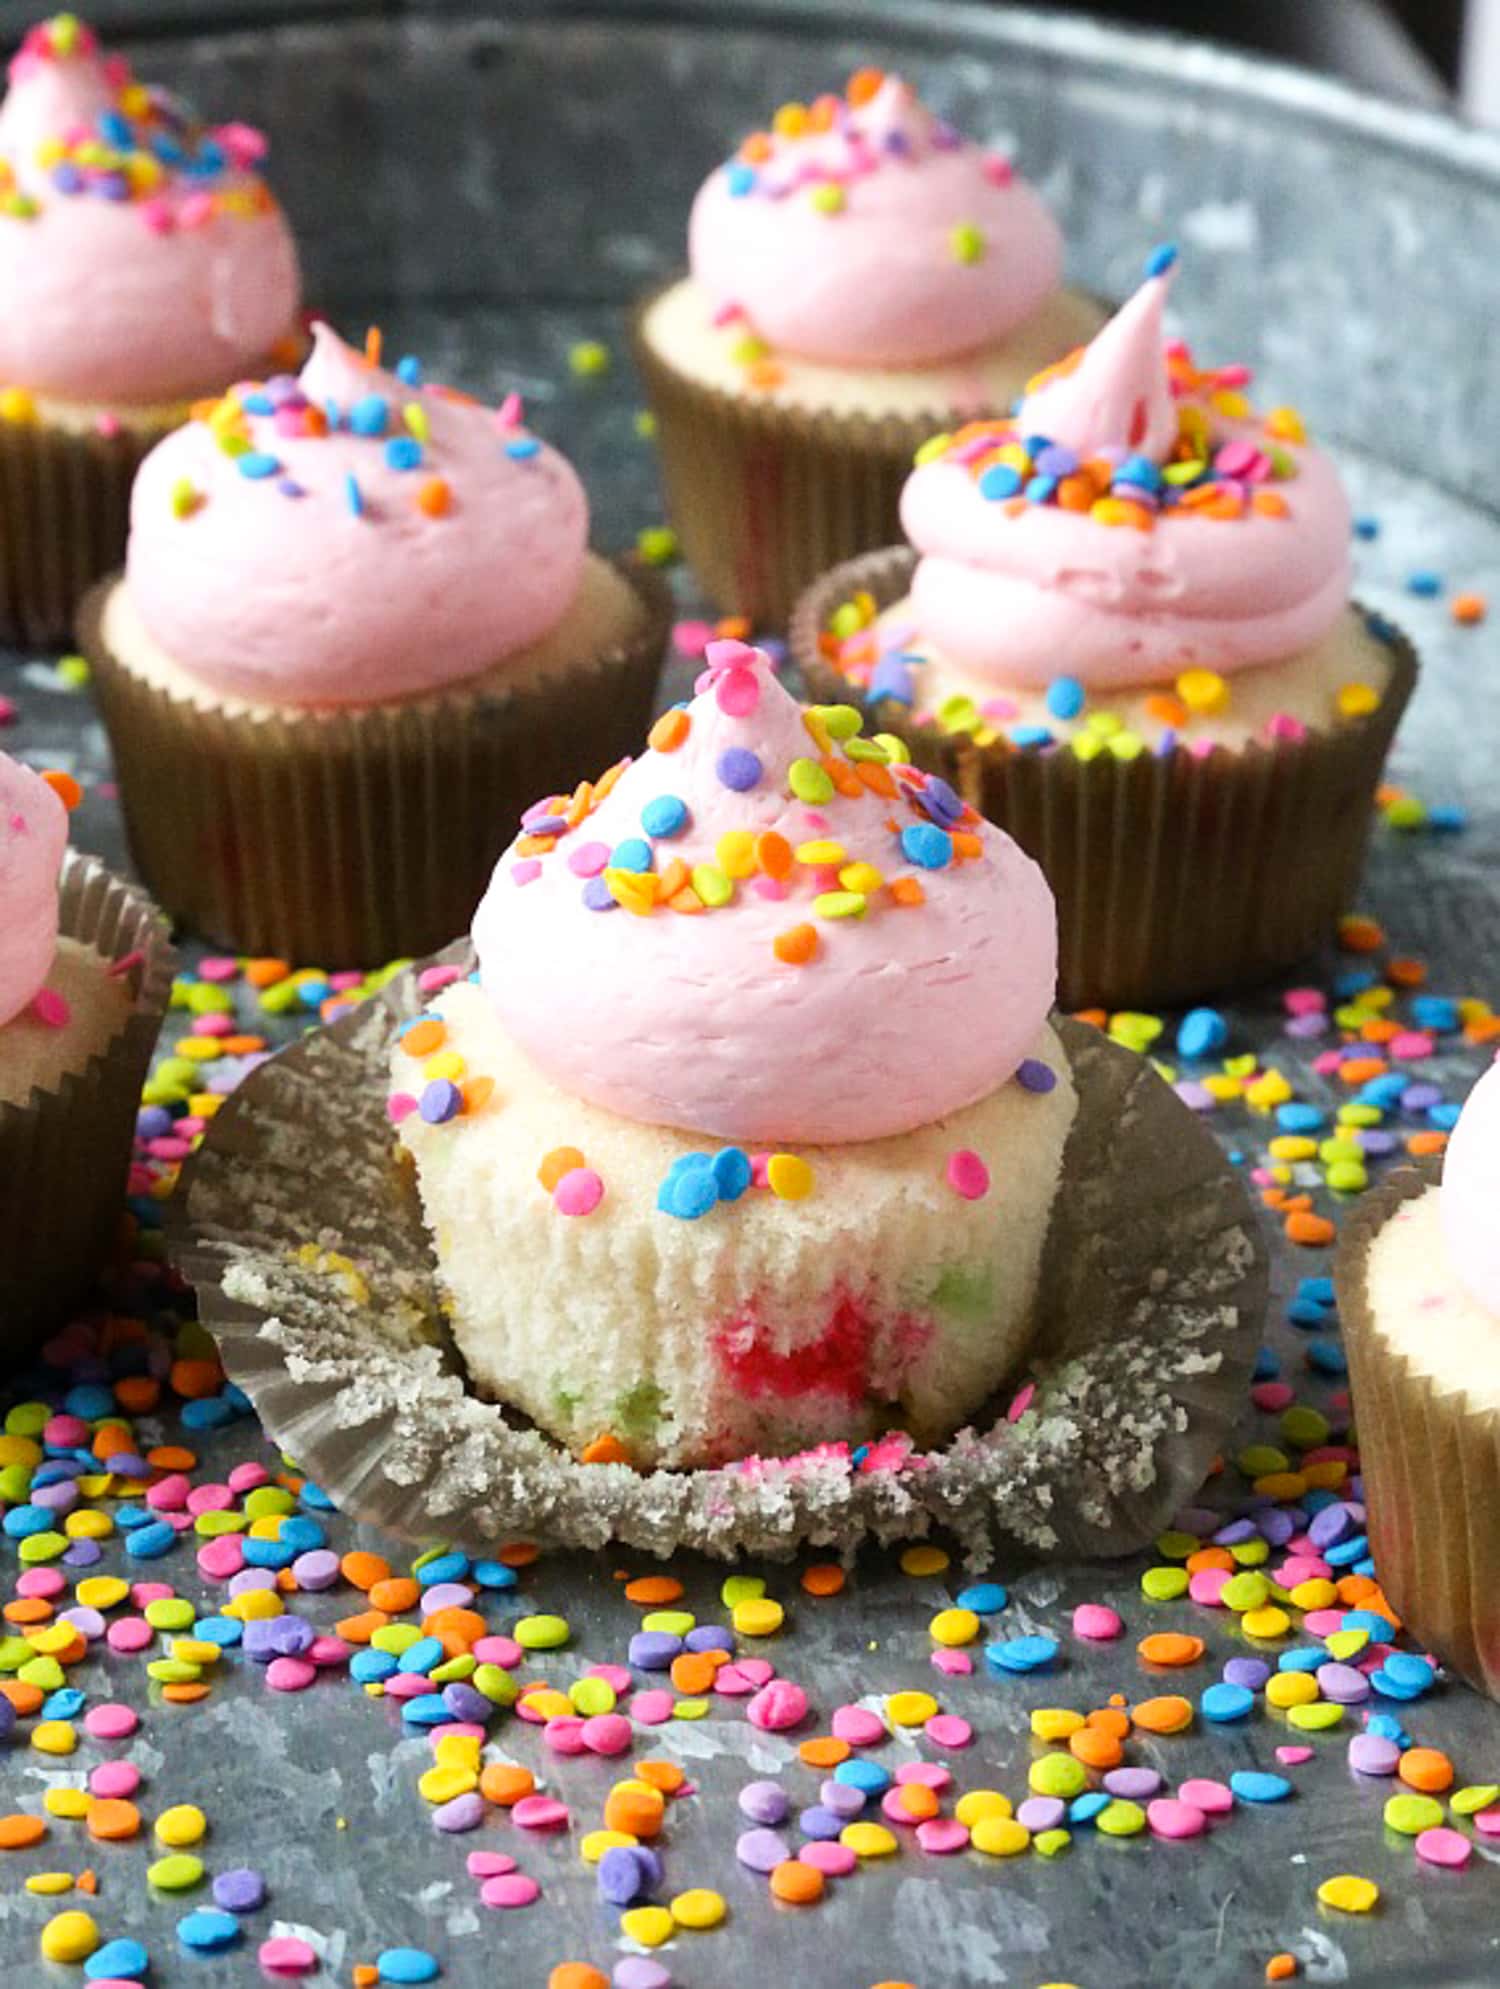 A streusel cupcake with peeled foil topped with pink buttercream frosting and sprinkles